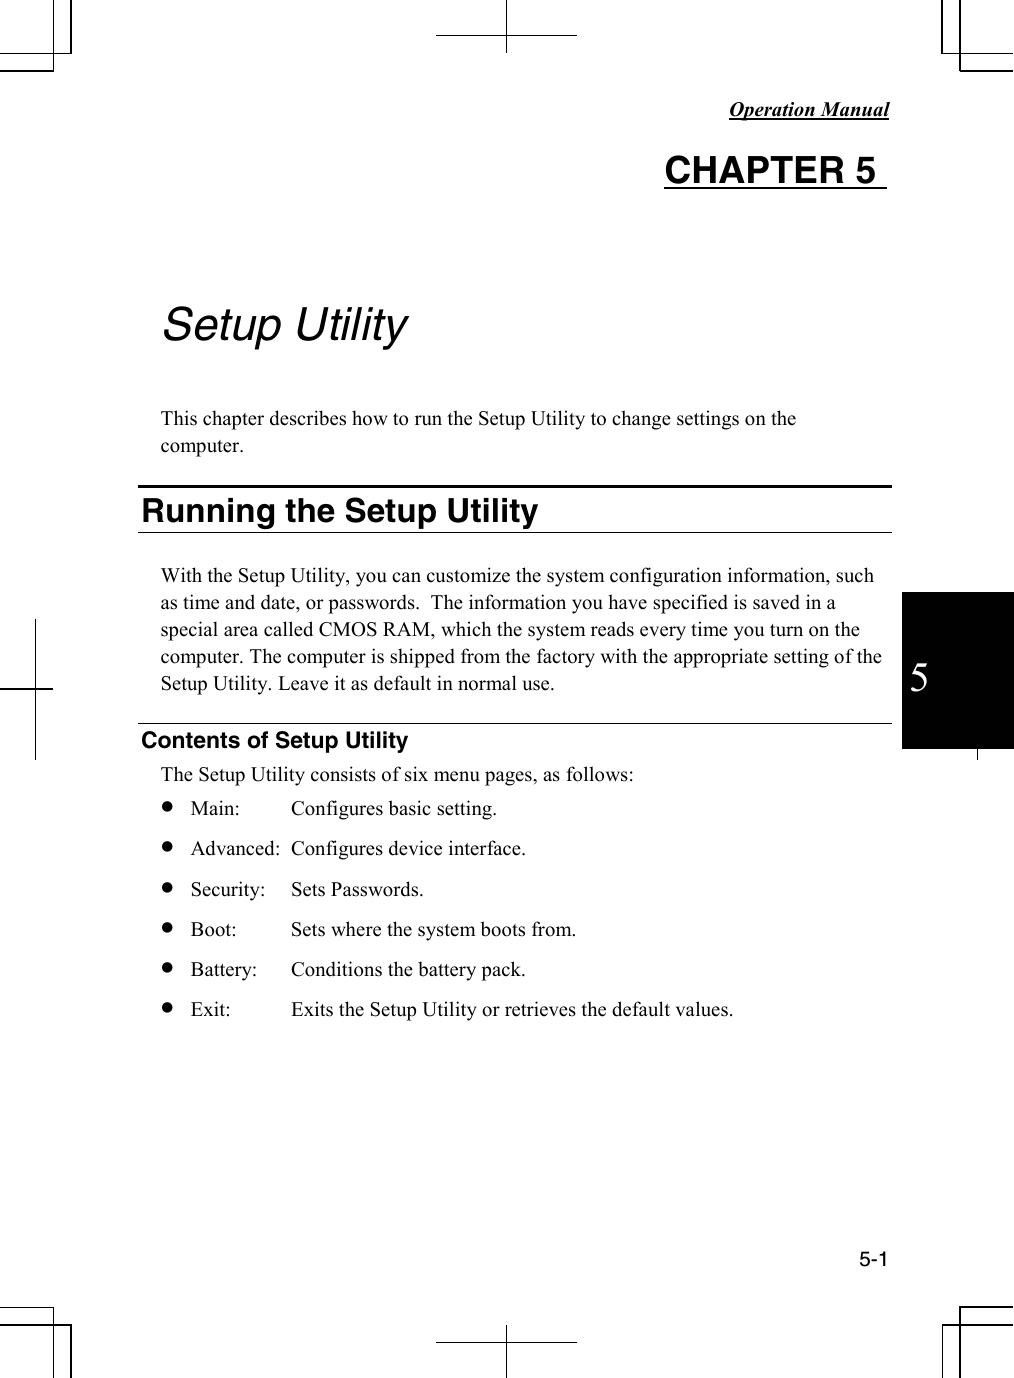   Operation Manual          5-1  5 CHAPTER 5         Setup Utility  This chapter describes how to run the Setup Utility to change settings on the computer.  Running the Setup Utility  With the Setup Utility, you can customize the system configuration information, such as time and date, or passwords.  The information you have specified is saved in a special area called CMOS RAM, which the system reads every time you turn on the computer. The computer is shipped from the factory with the appropriate setting of the Setup Utility. Leave it as default in normal use.  Contents of Setup Utility The Setup Utility consists of six menu pages, as follows: • Main:  Configures basic setting.   • Advanced:  Configures device interface.  • Security:  Sets Passwords.  • Boot:  Sets where the system boots from.  • Battery:  Conditions the battery pack. • Exit:  Exits the Setup Utility or retrieves the default values.        